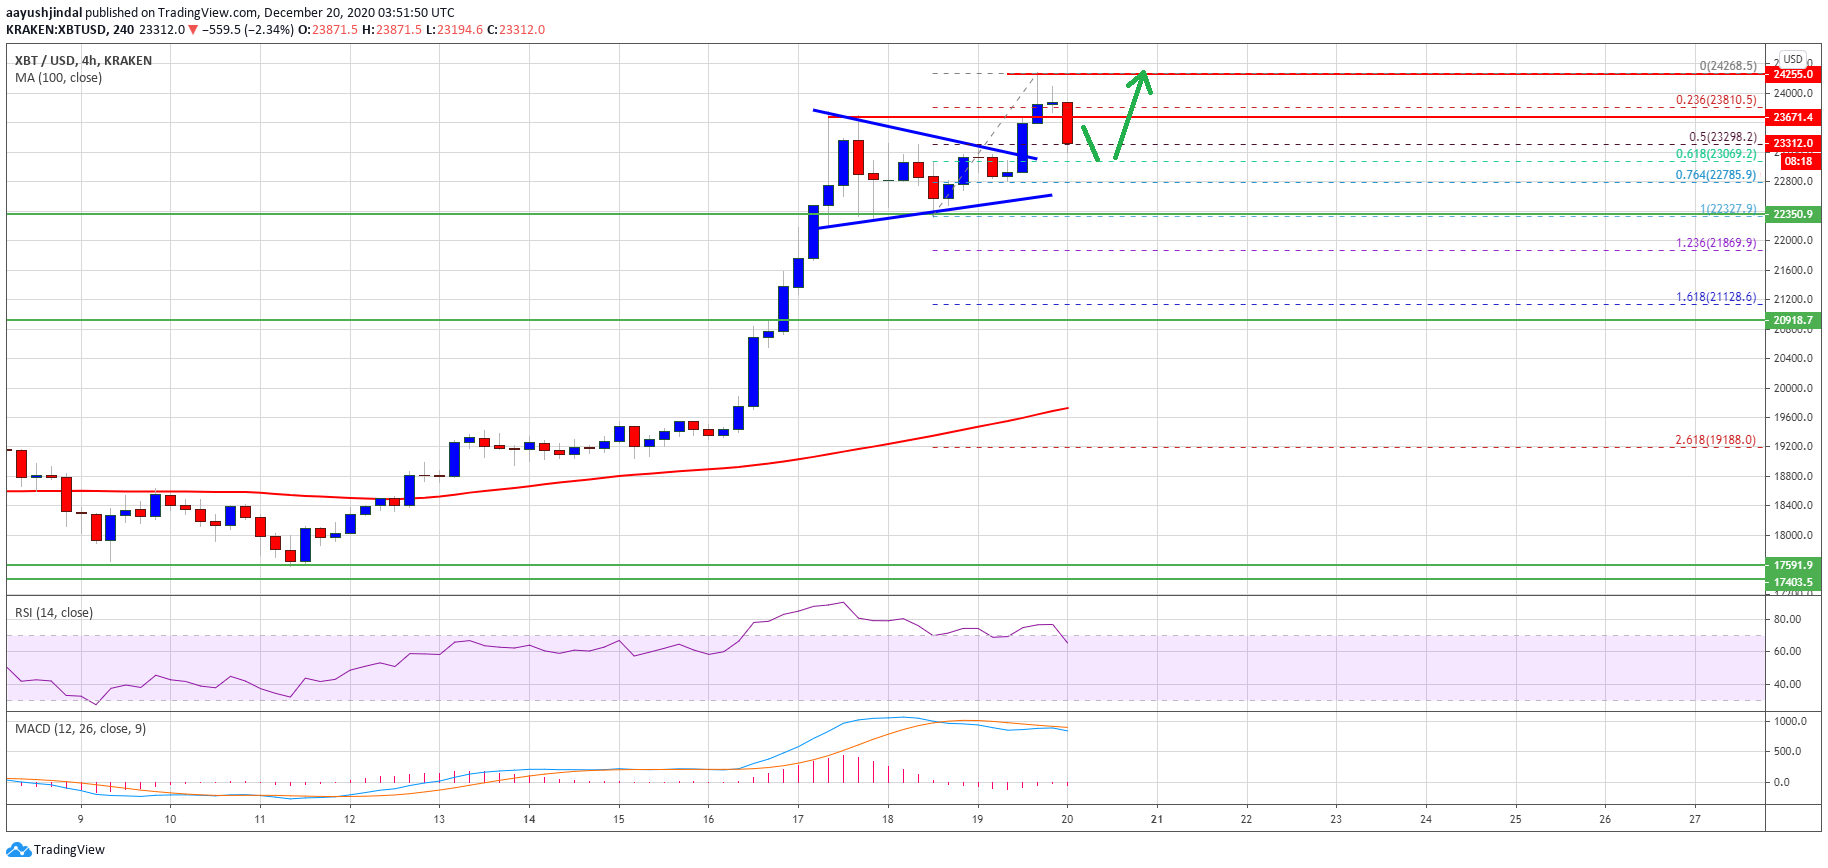 Bitcoin Key Indicators Suggest A Strengthening Case For Rally To $25K